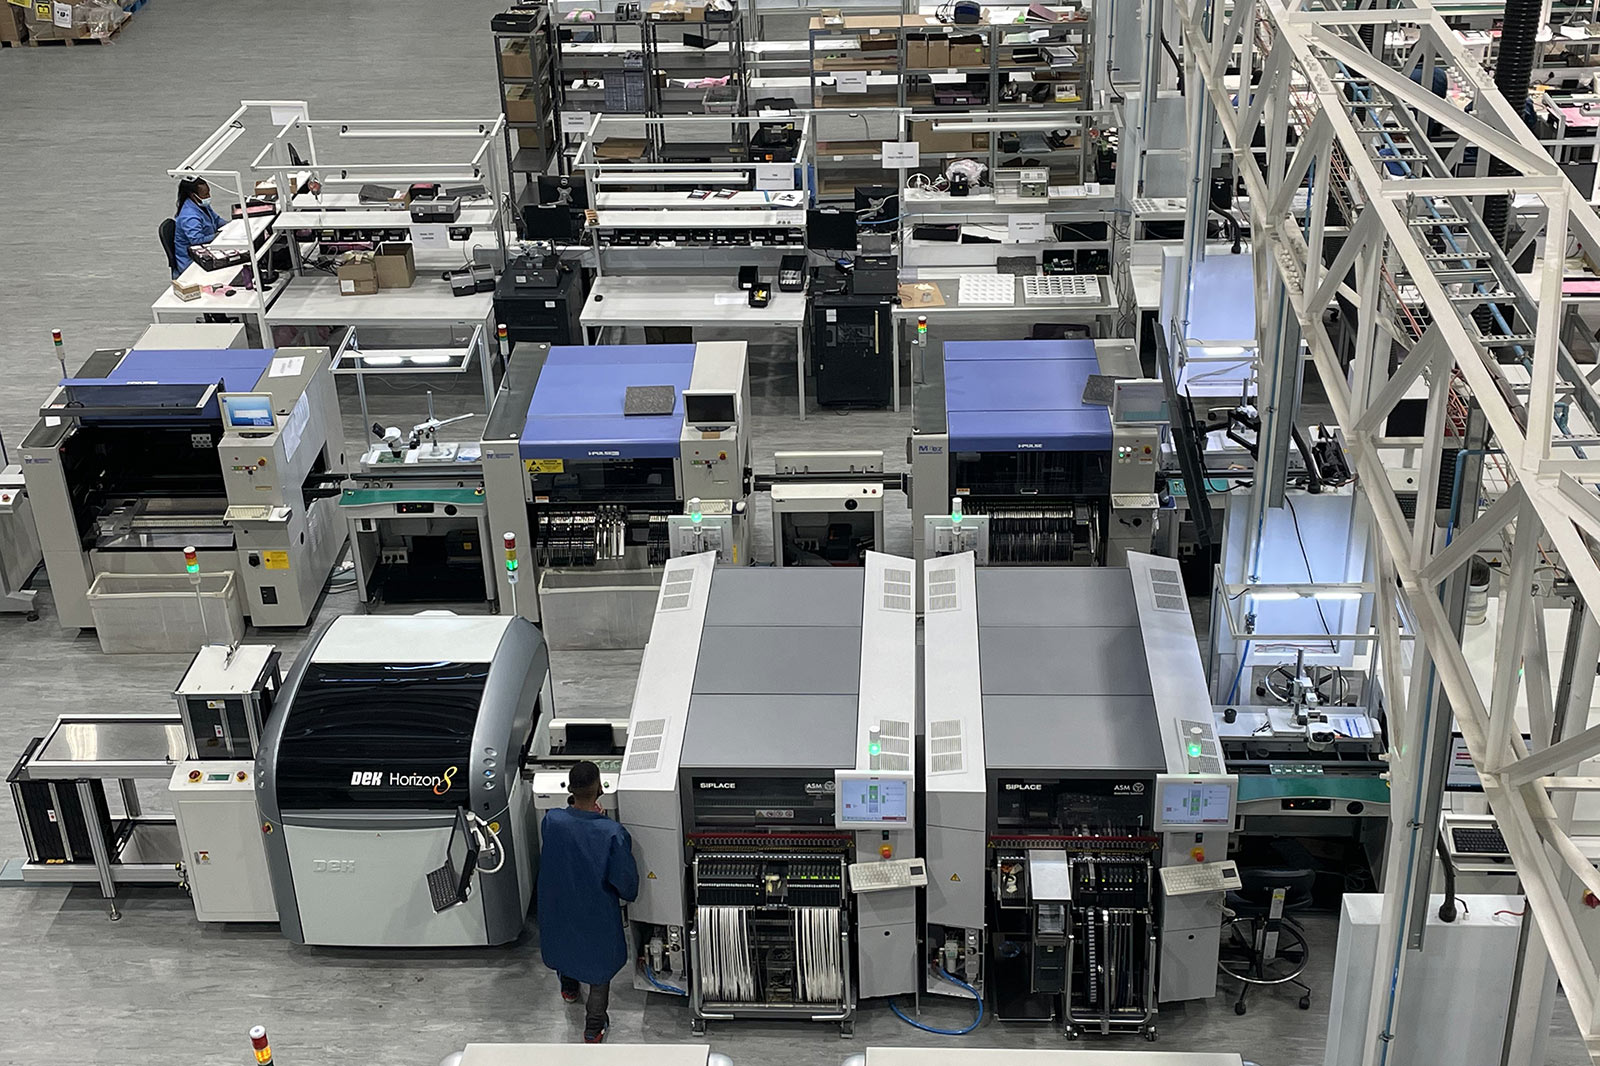 The two new SIPLACE systems have already processed more than 30 million components. The uncomplicated and fast product changeovers thereby eliminate many previous bottlenecks for Jemstech.